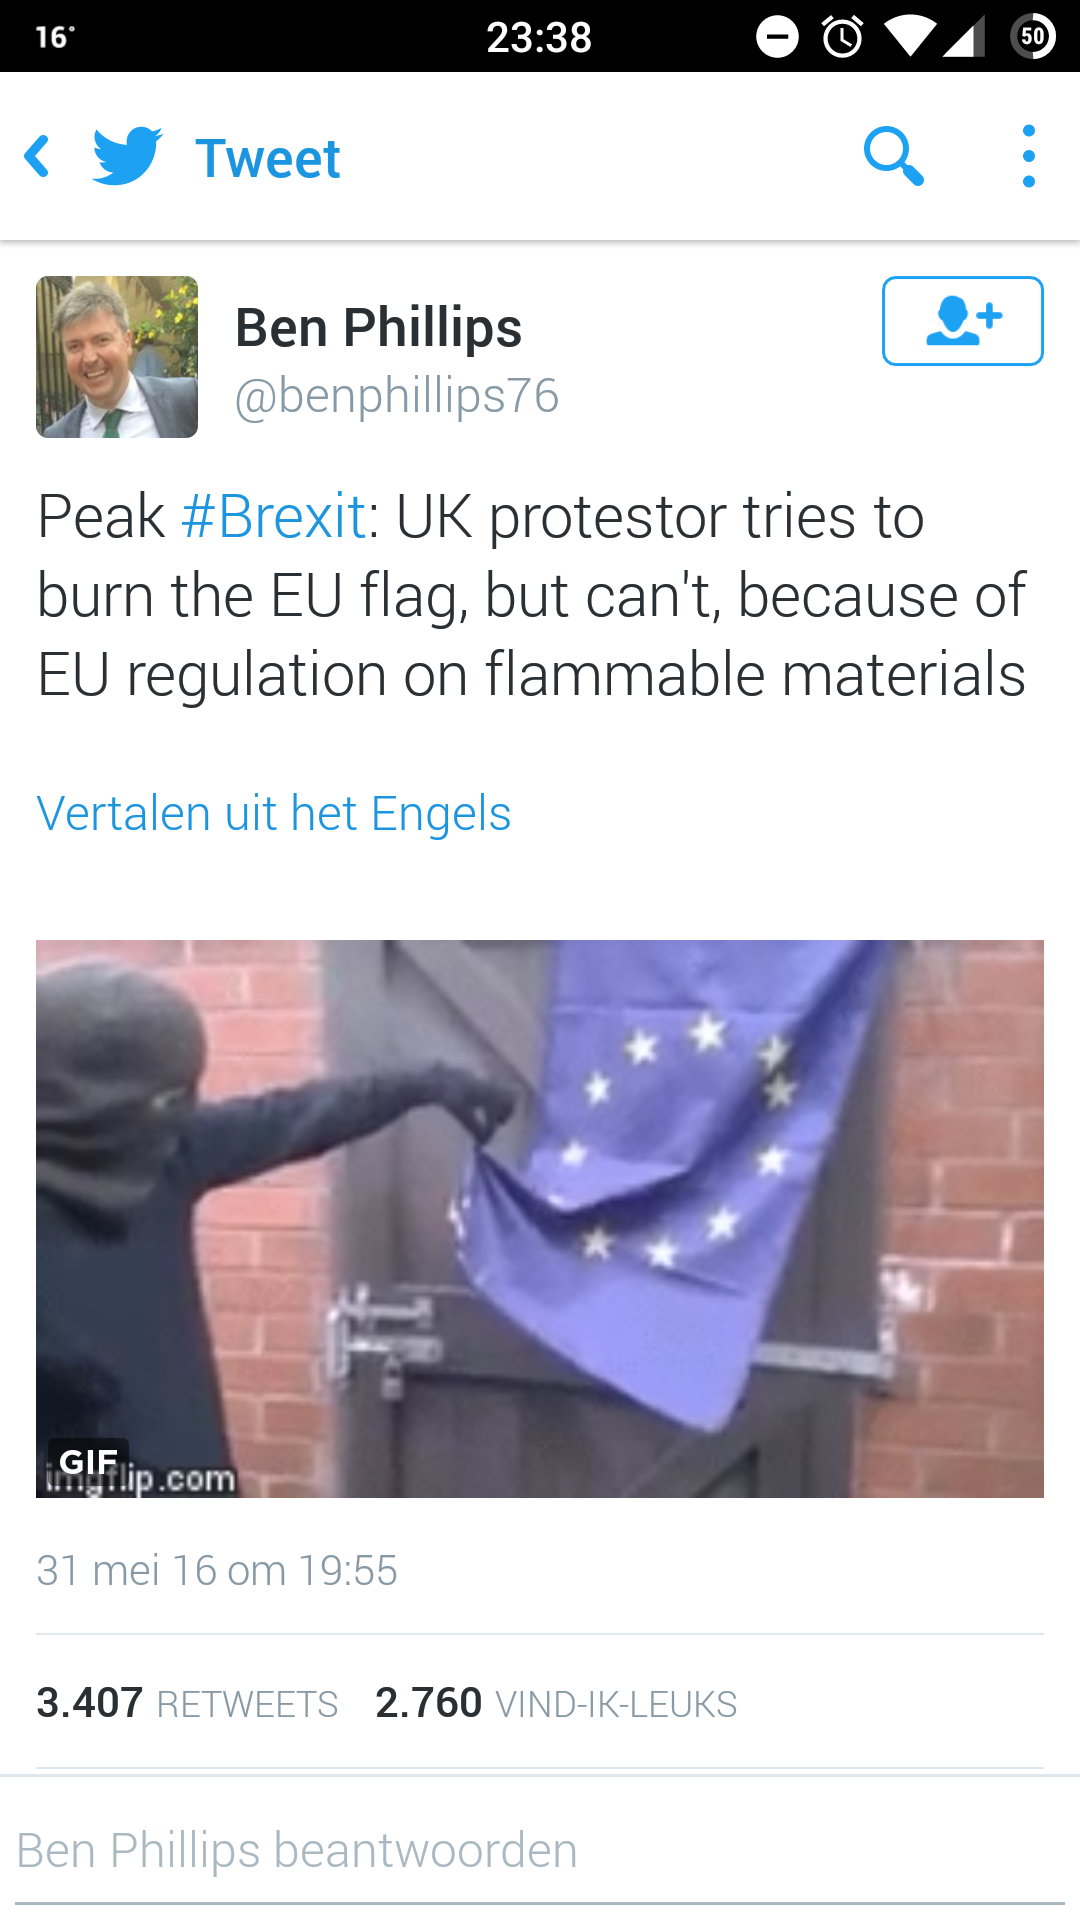 Well played EU, well played...